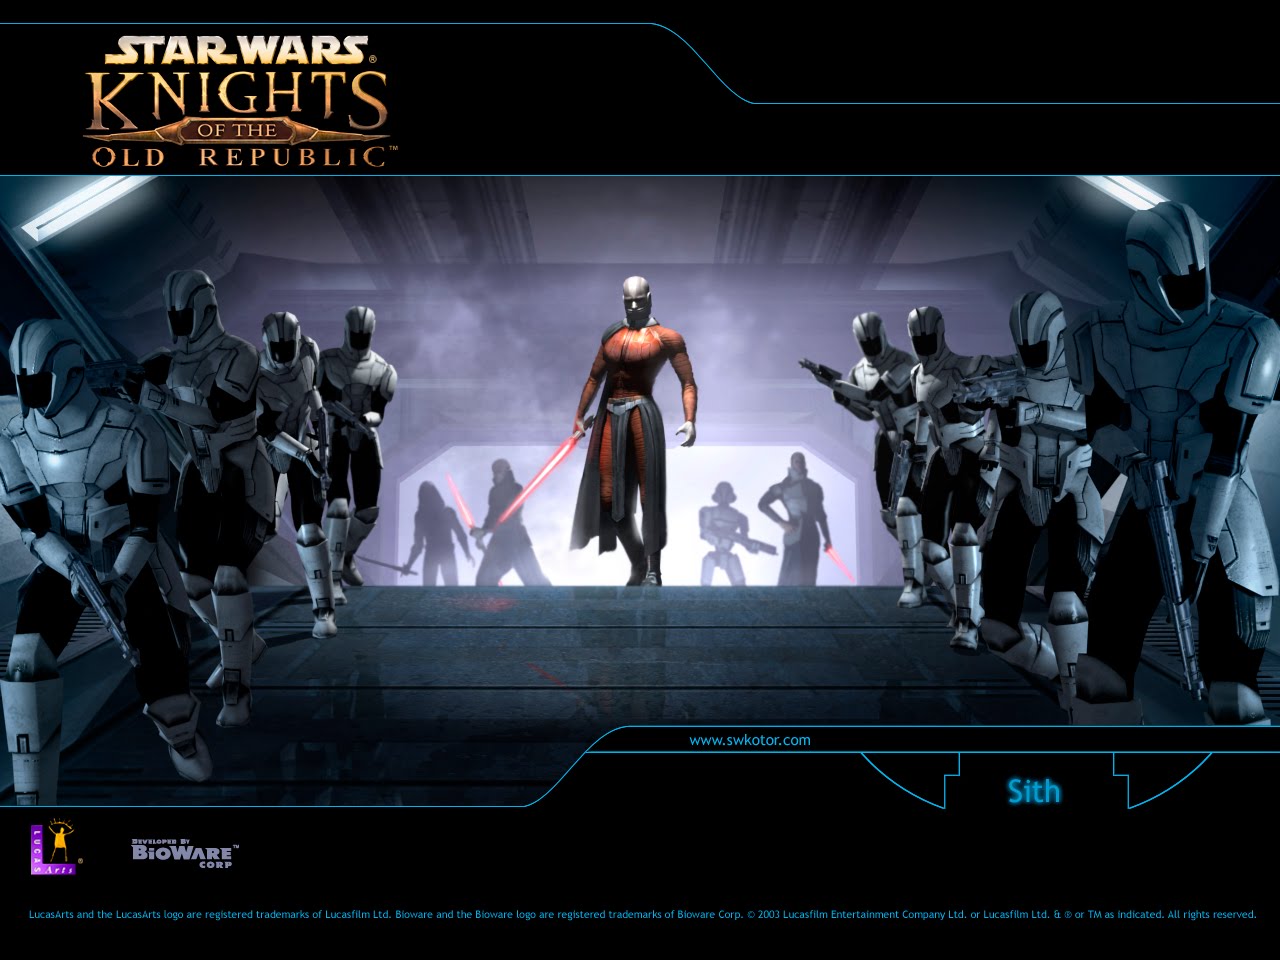 Super Punch Star Wars The Old Republic Wallpaper